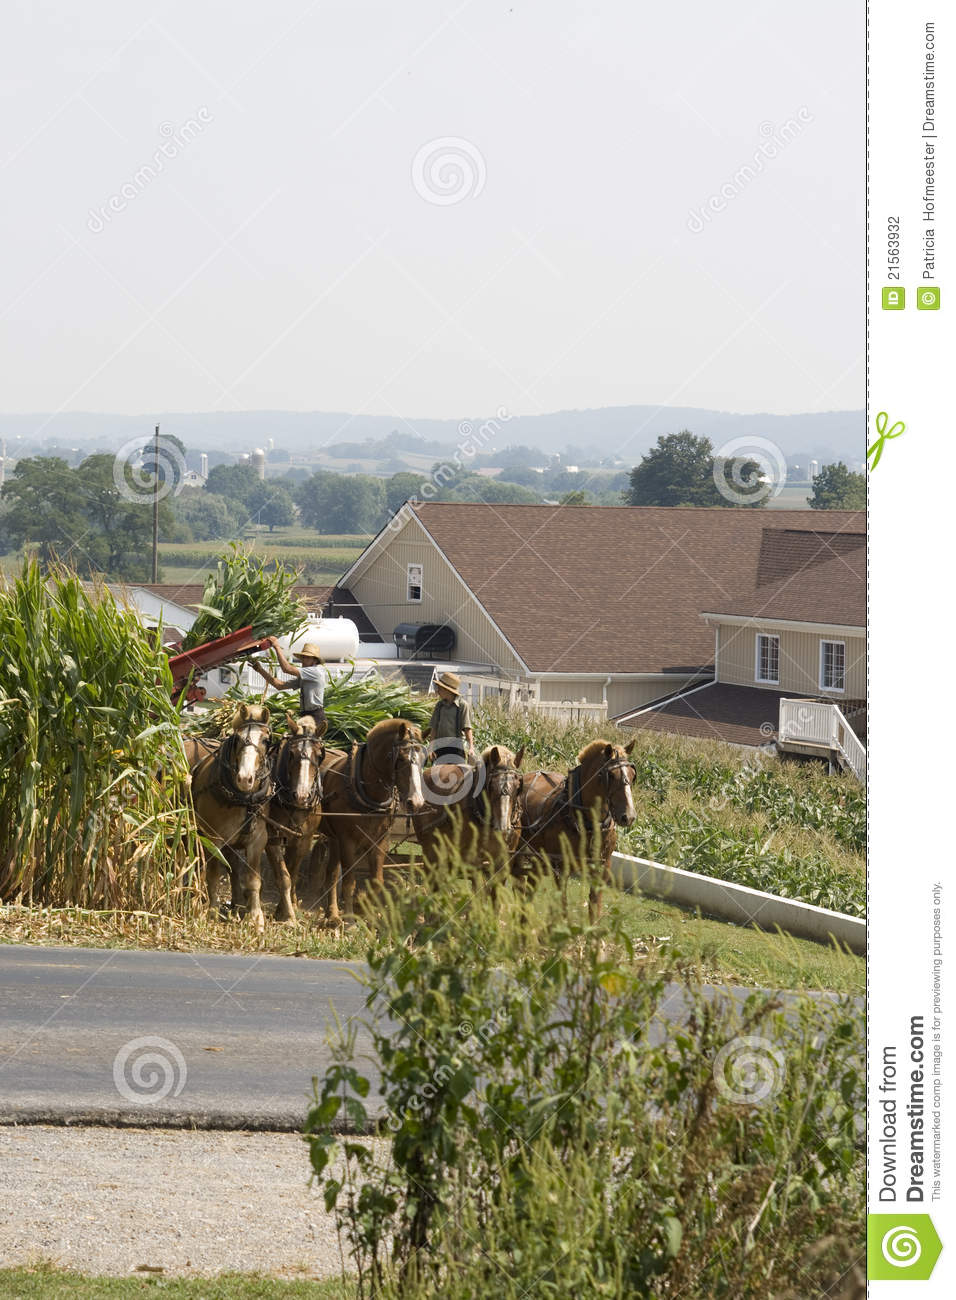 Amish Farmer And Son Editorial Photography   Image  21563932